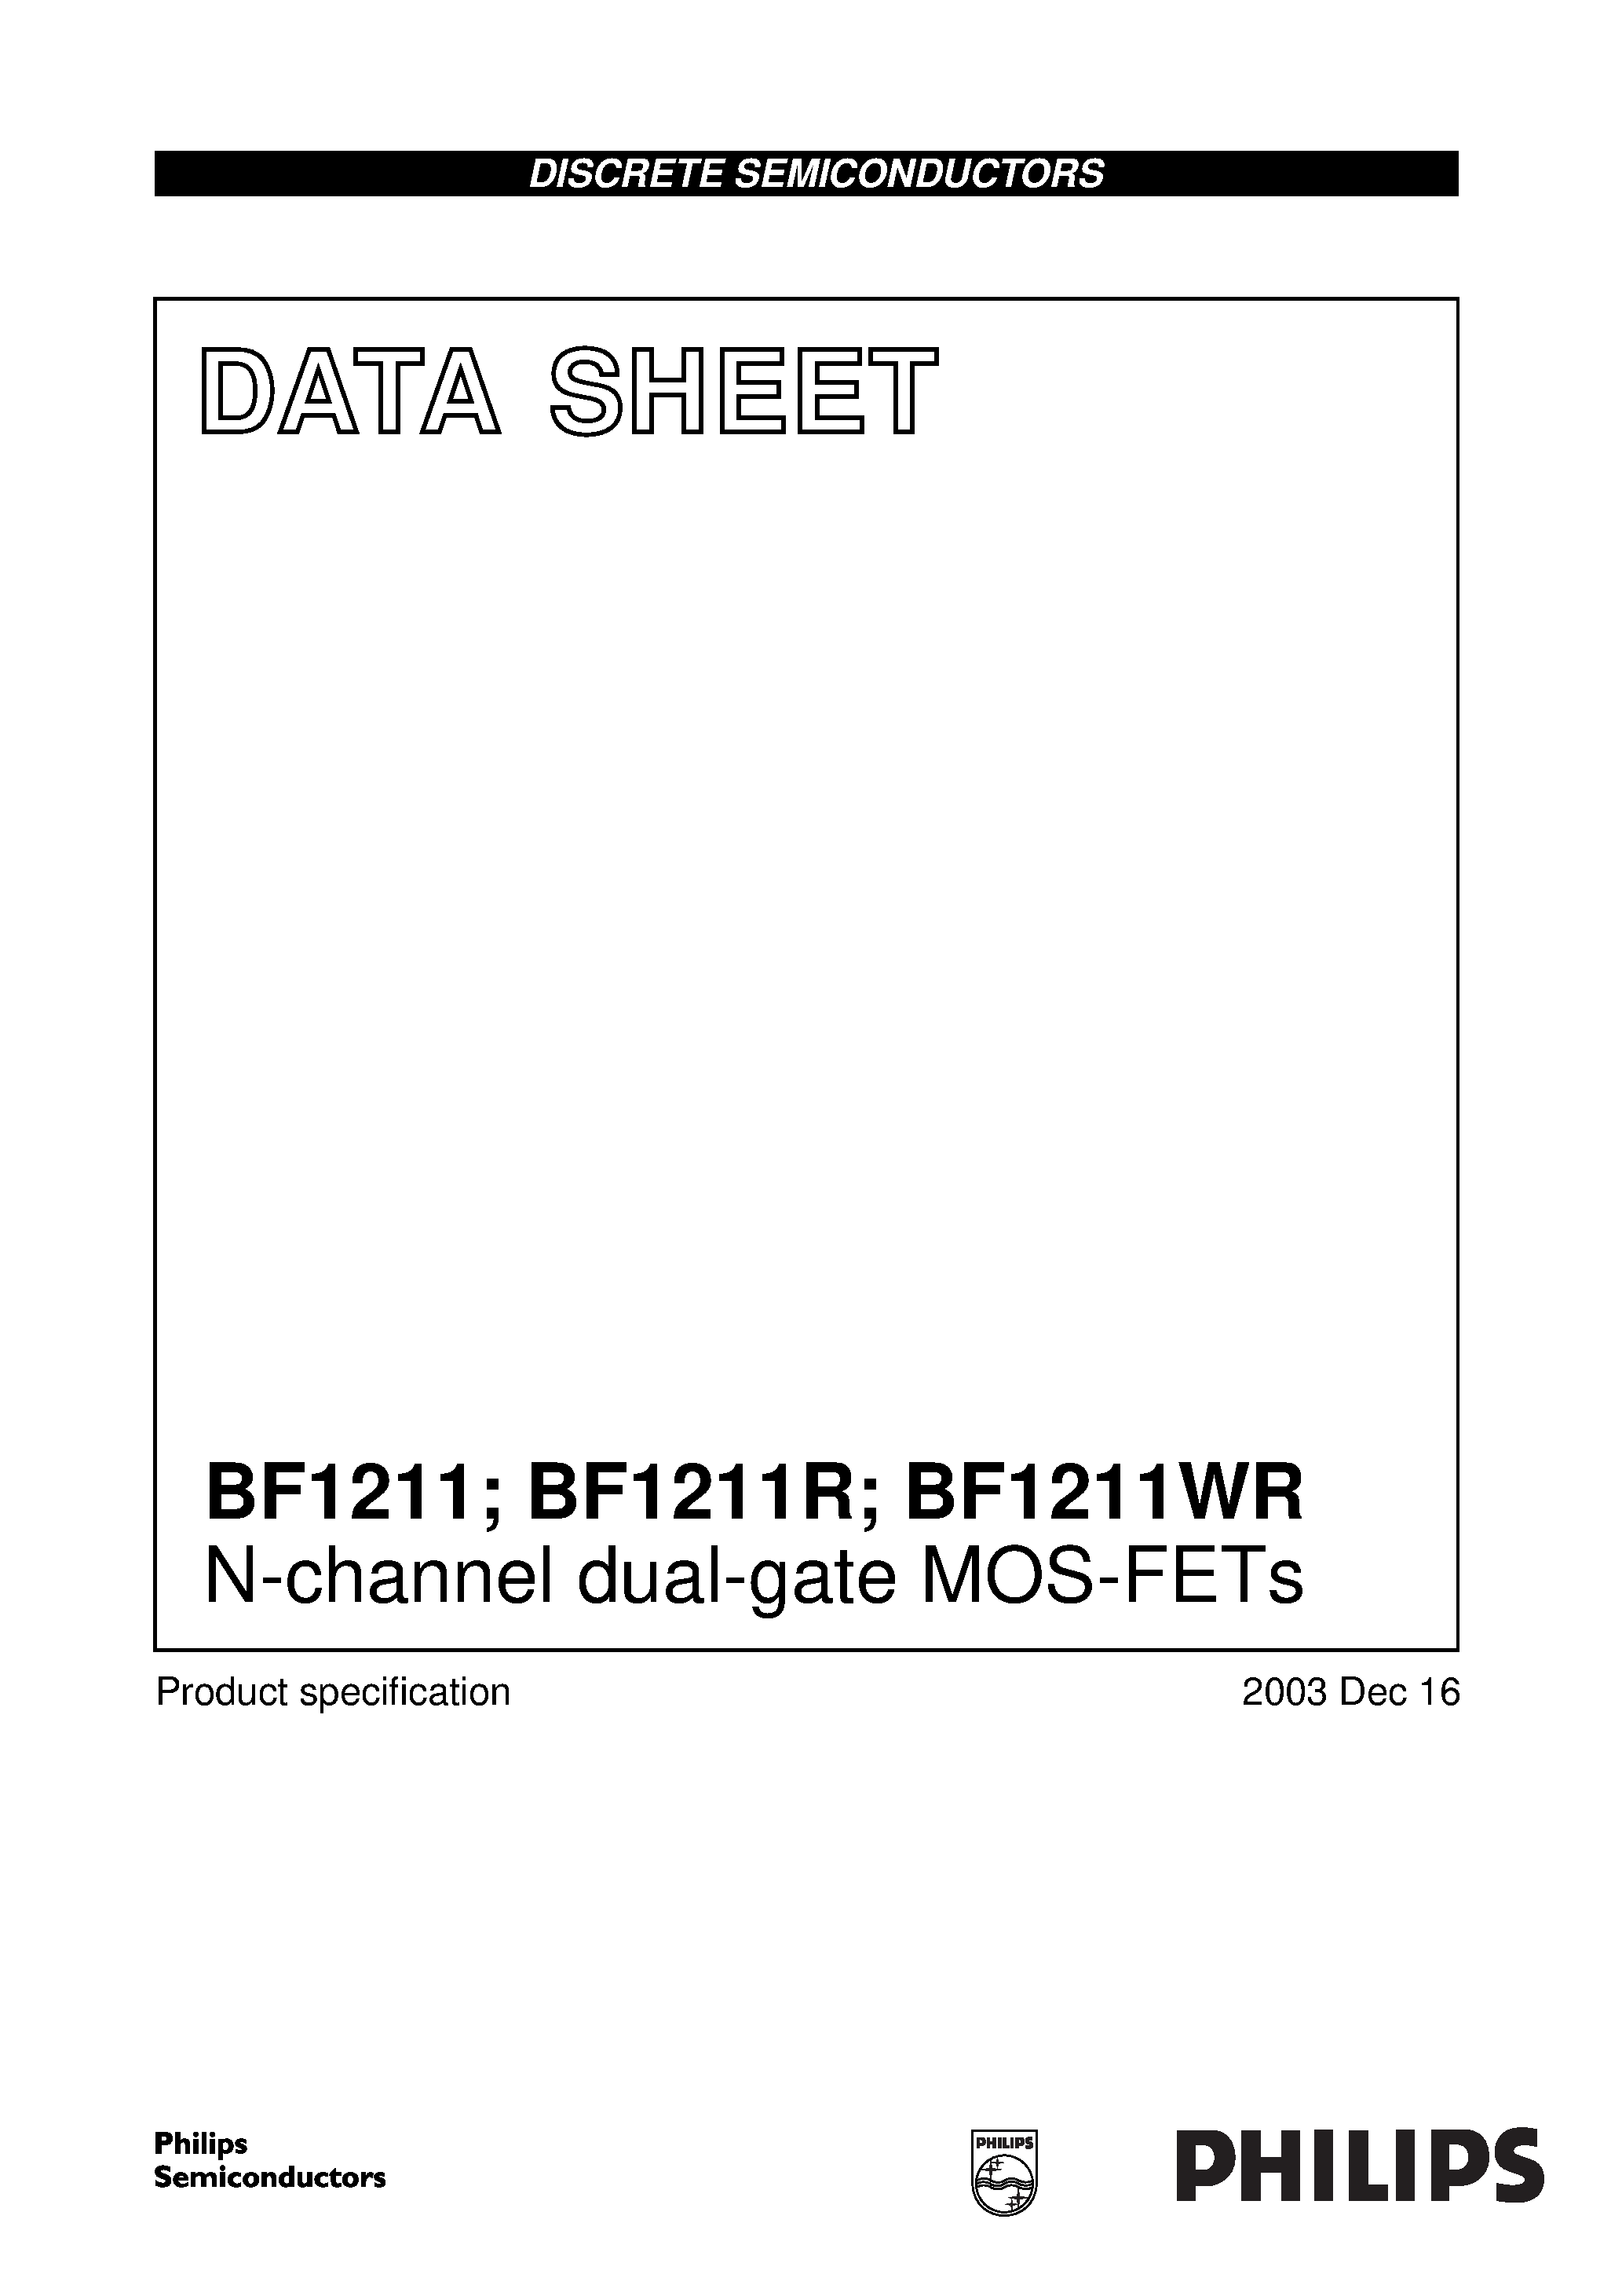 Datasheet BF1211WR - N-channel dual-gate MOS-FETs page 1